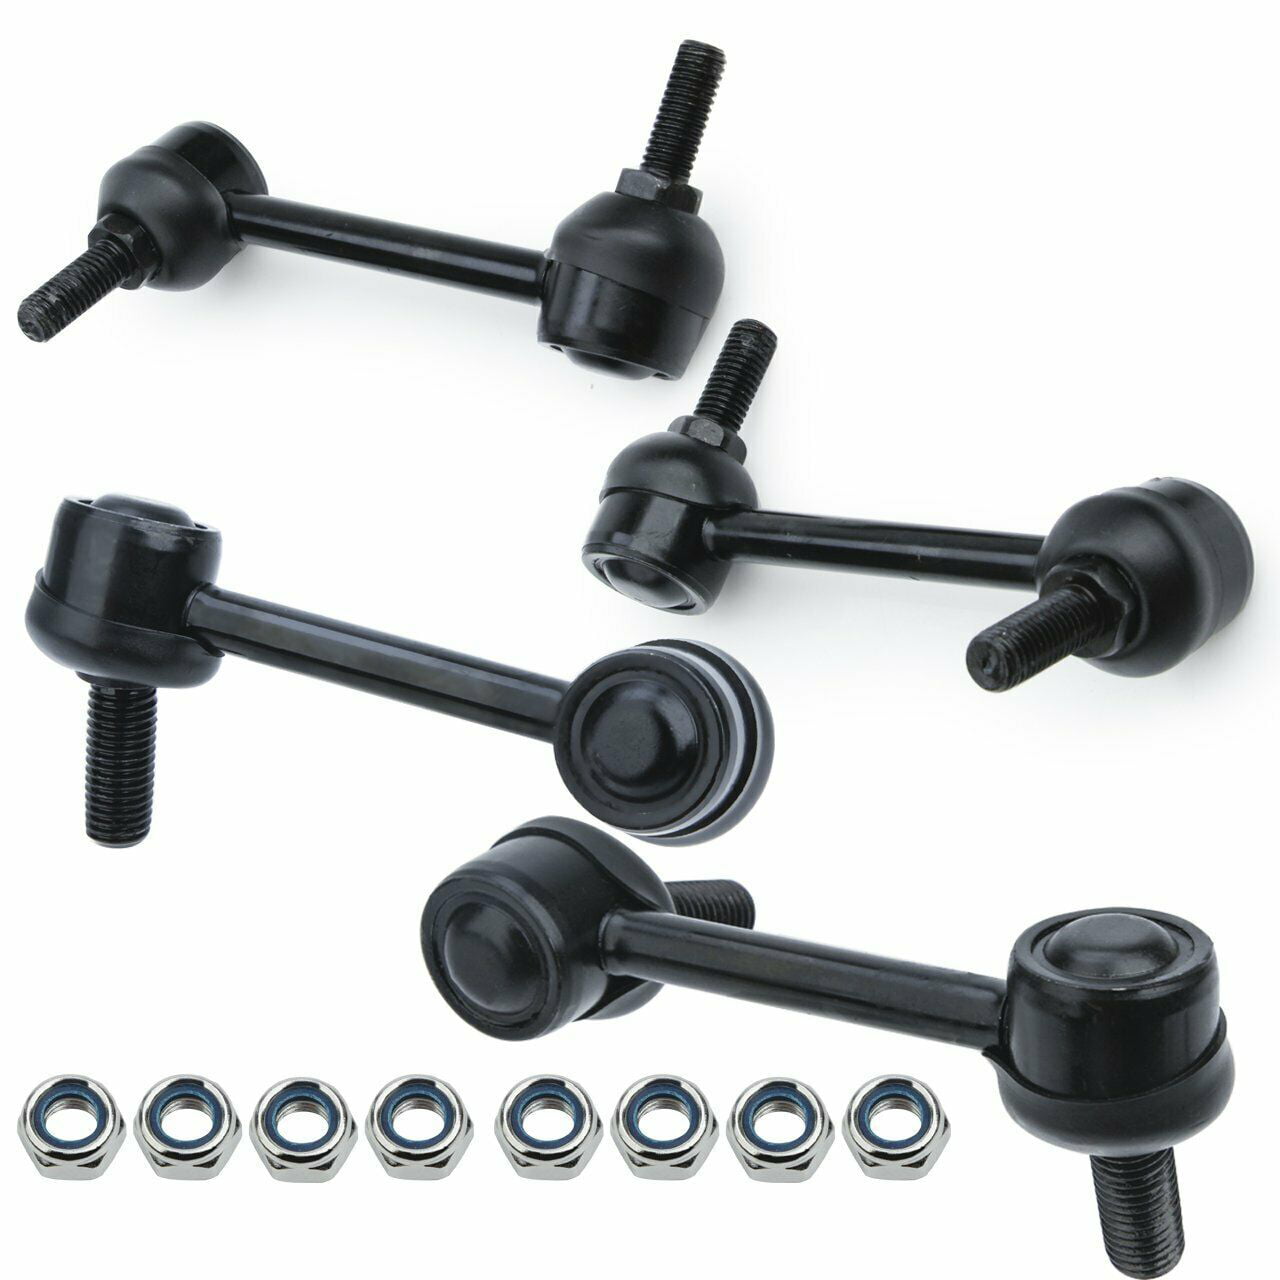 4pc Front and Rear Stabilizer Sway Bar End Links for 2004-2007 Chevy Trailblazer 